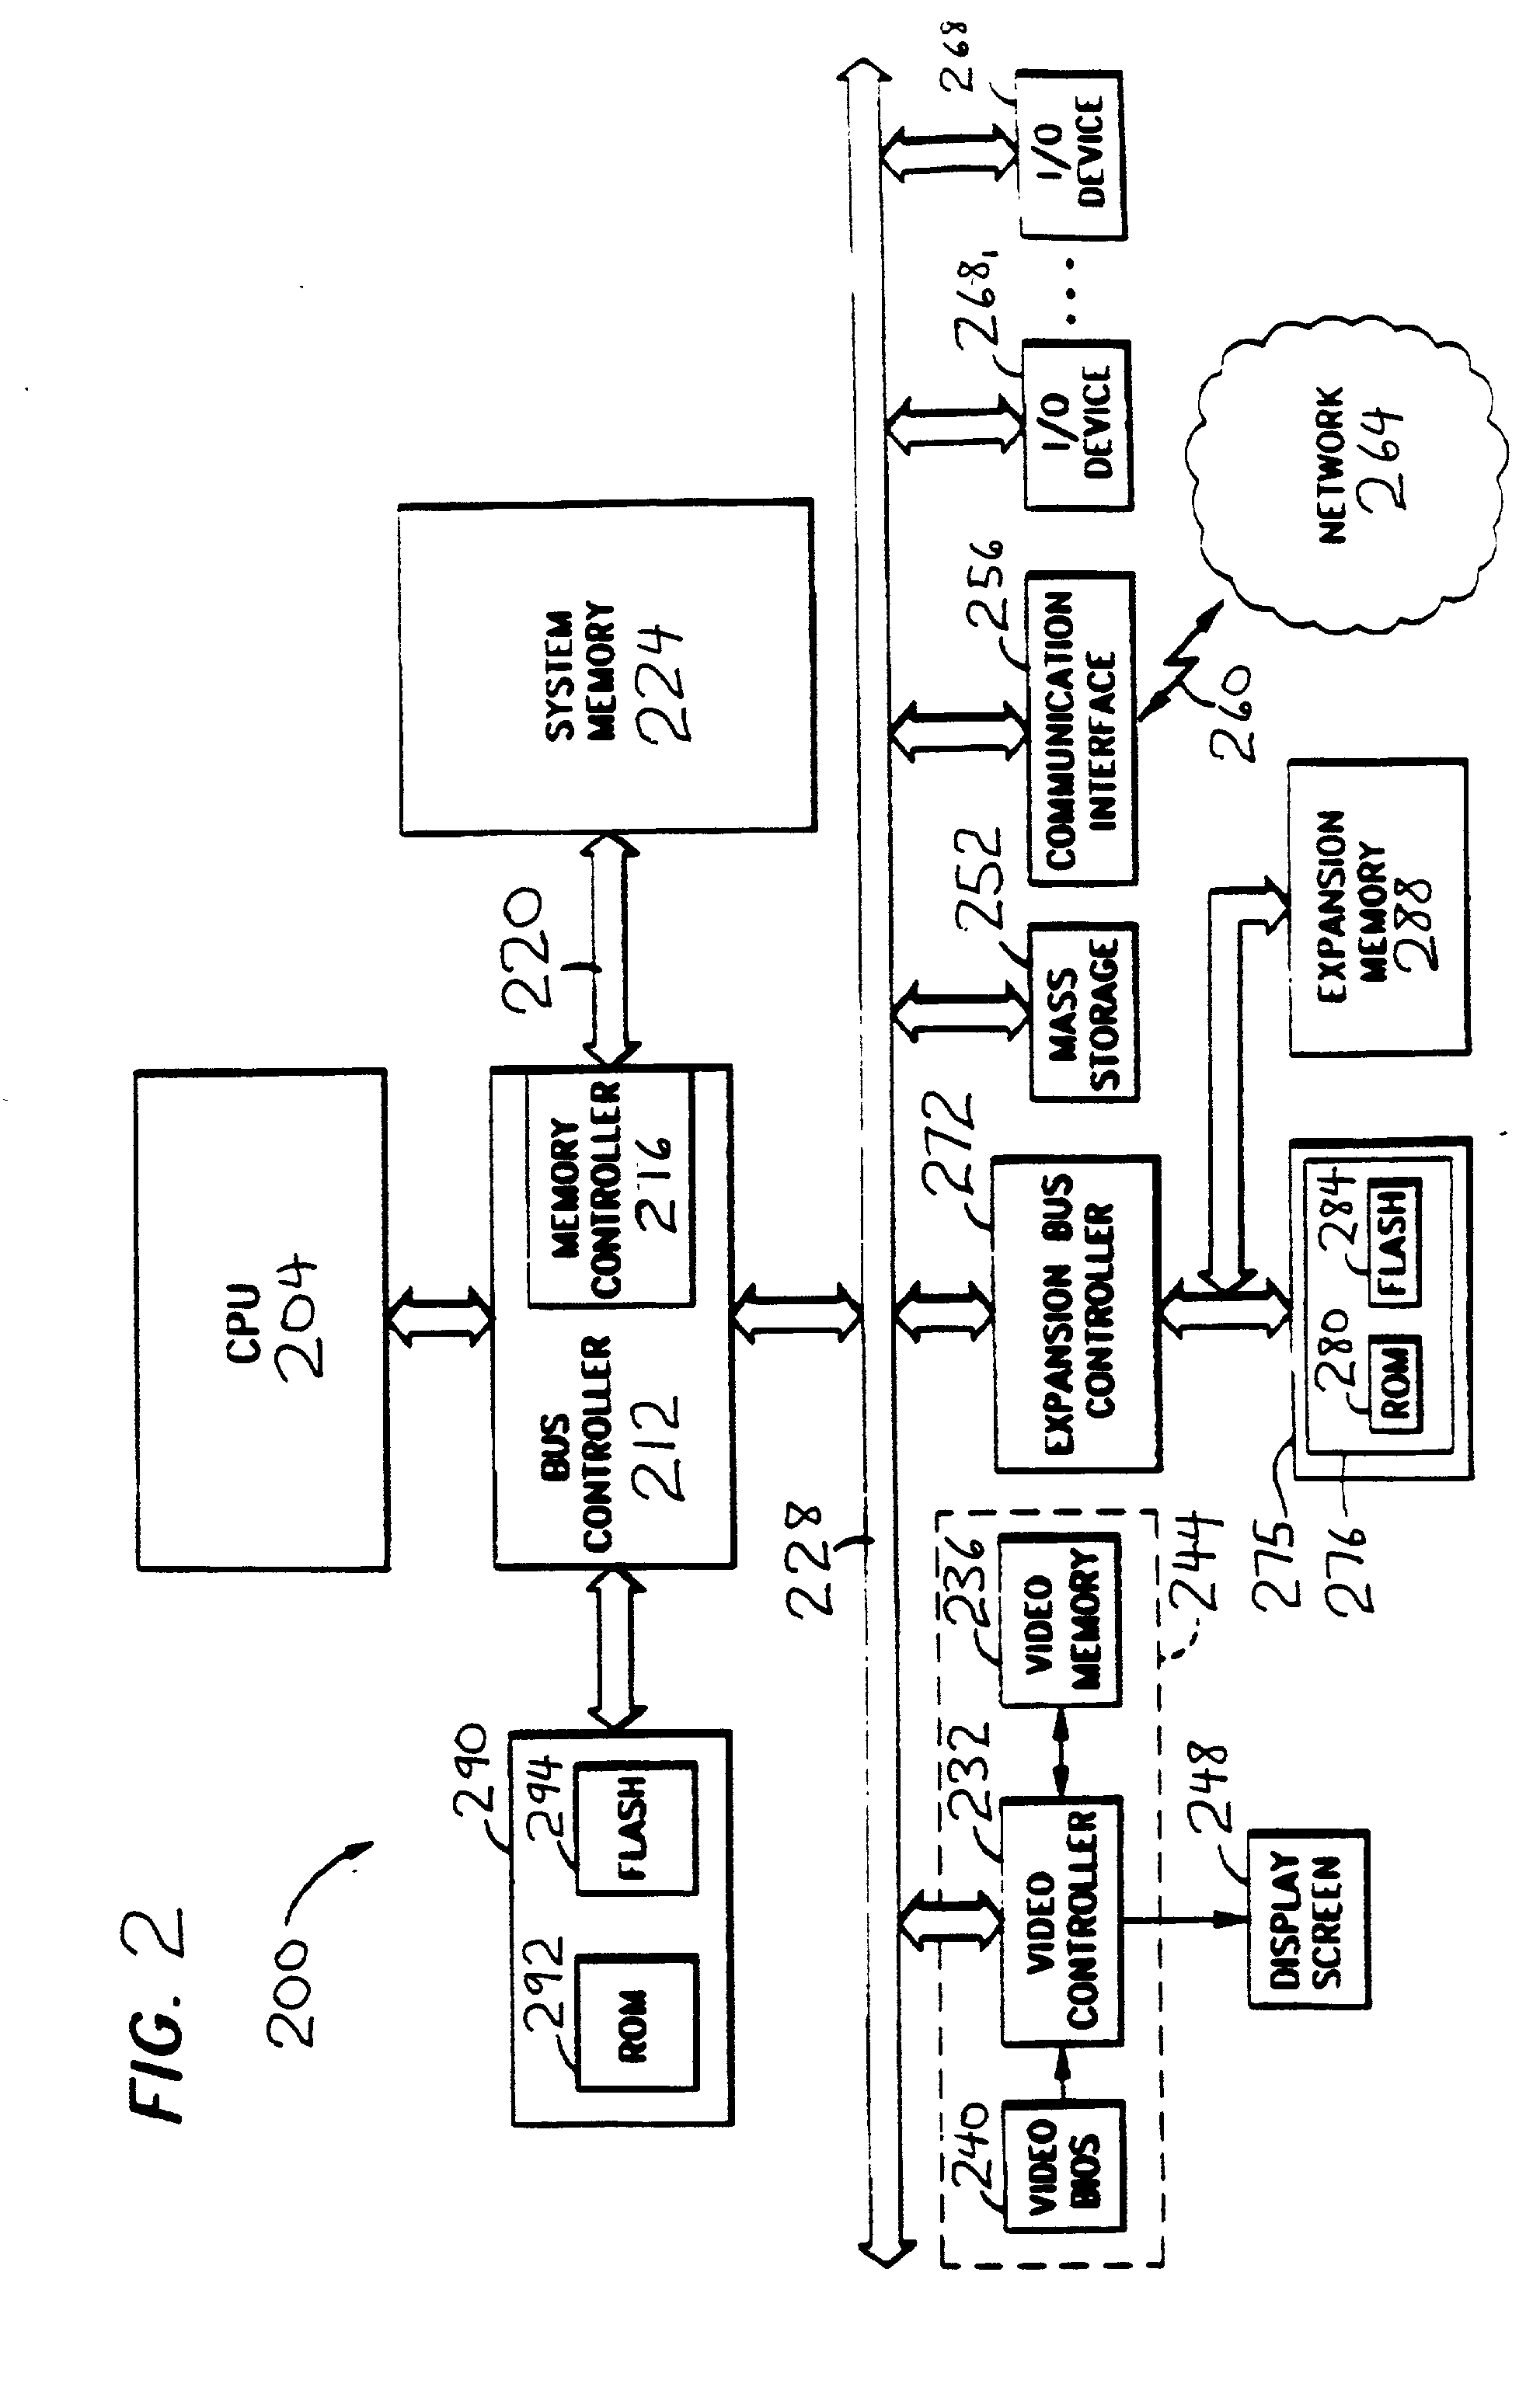 Apparatus and method for providing consolidated medical information